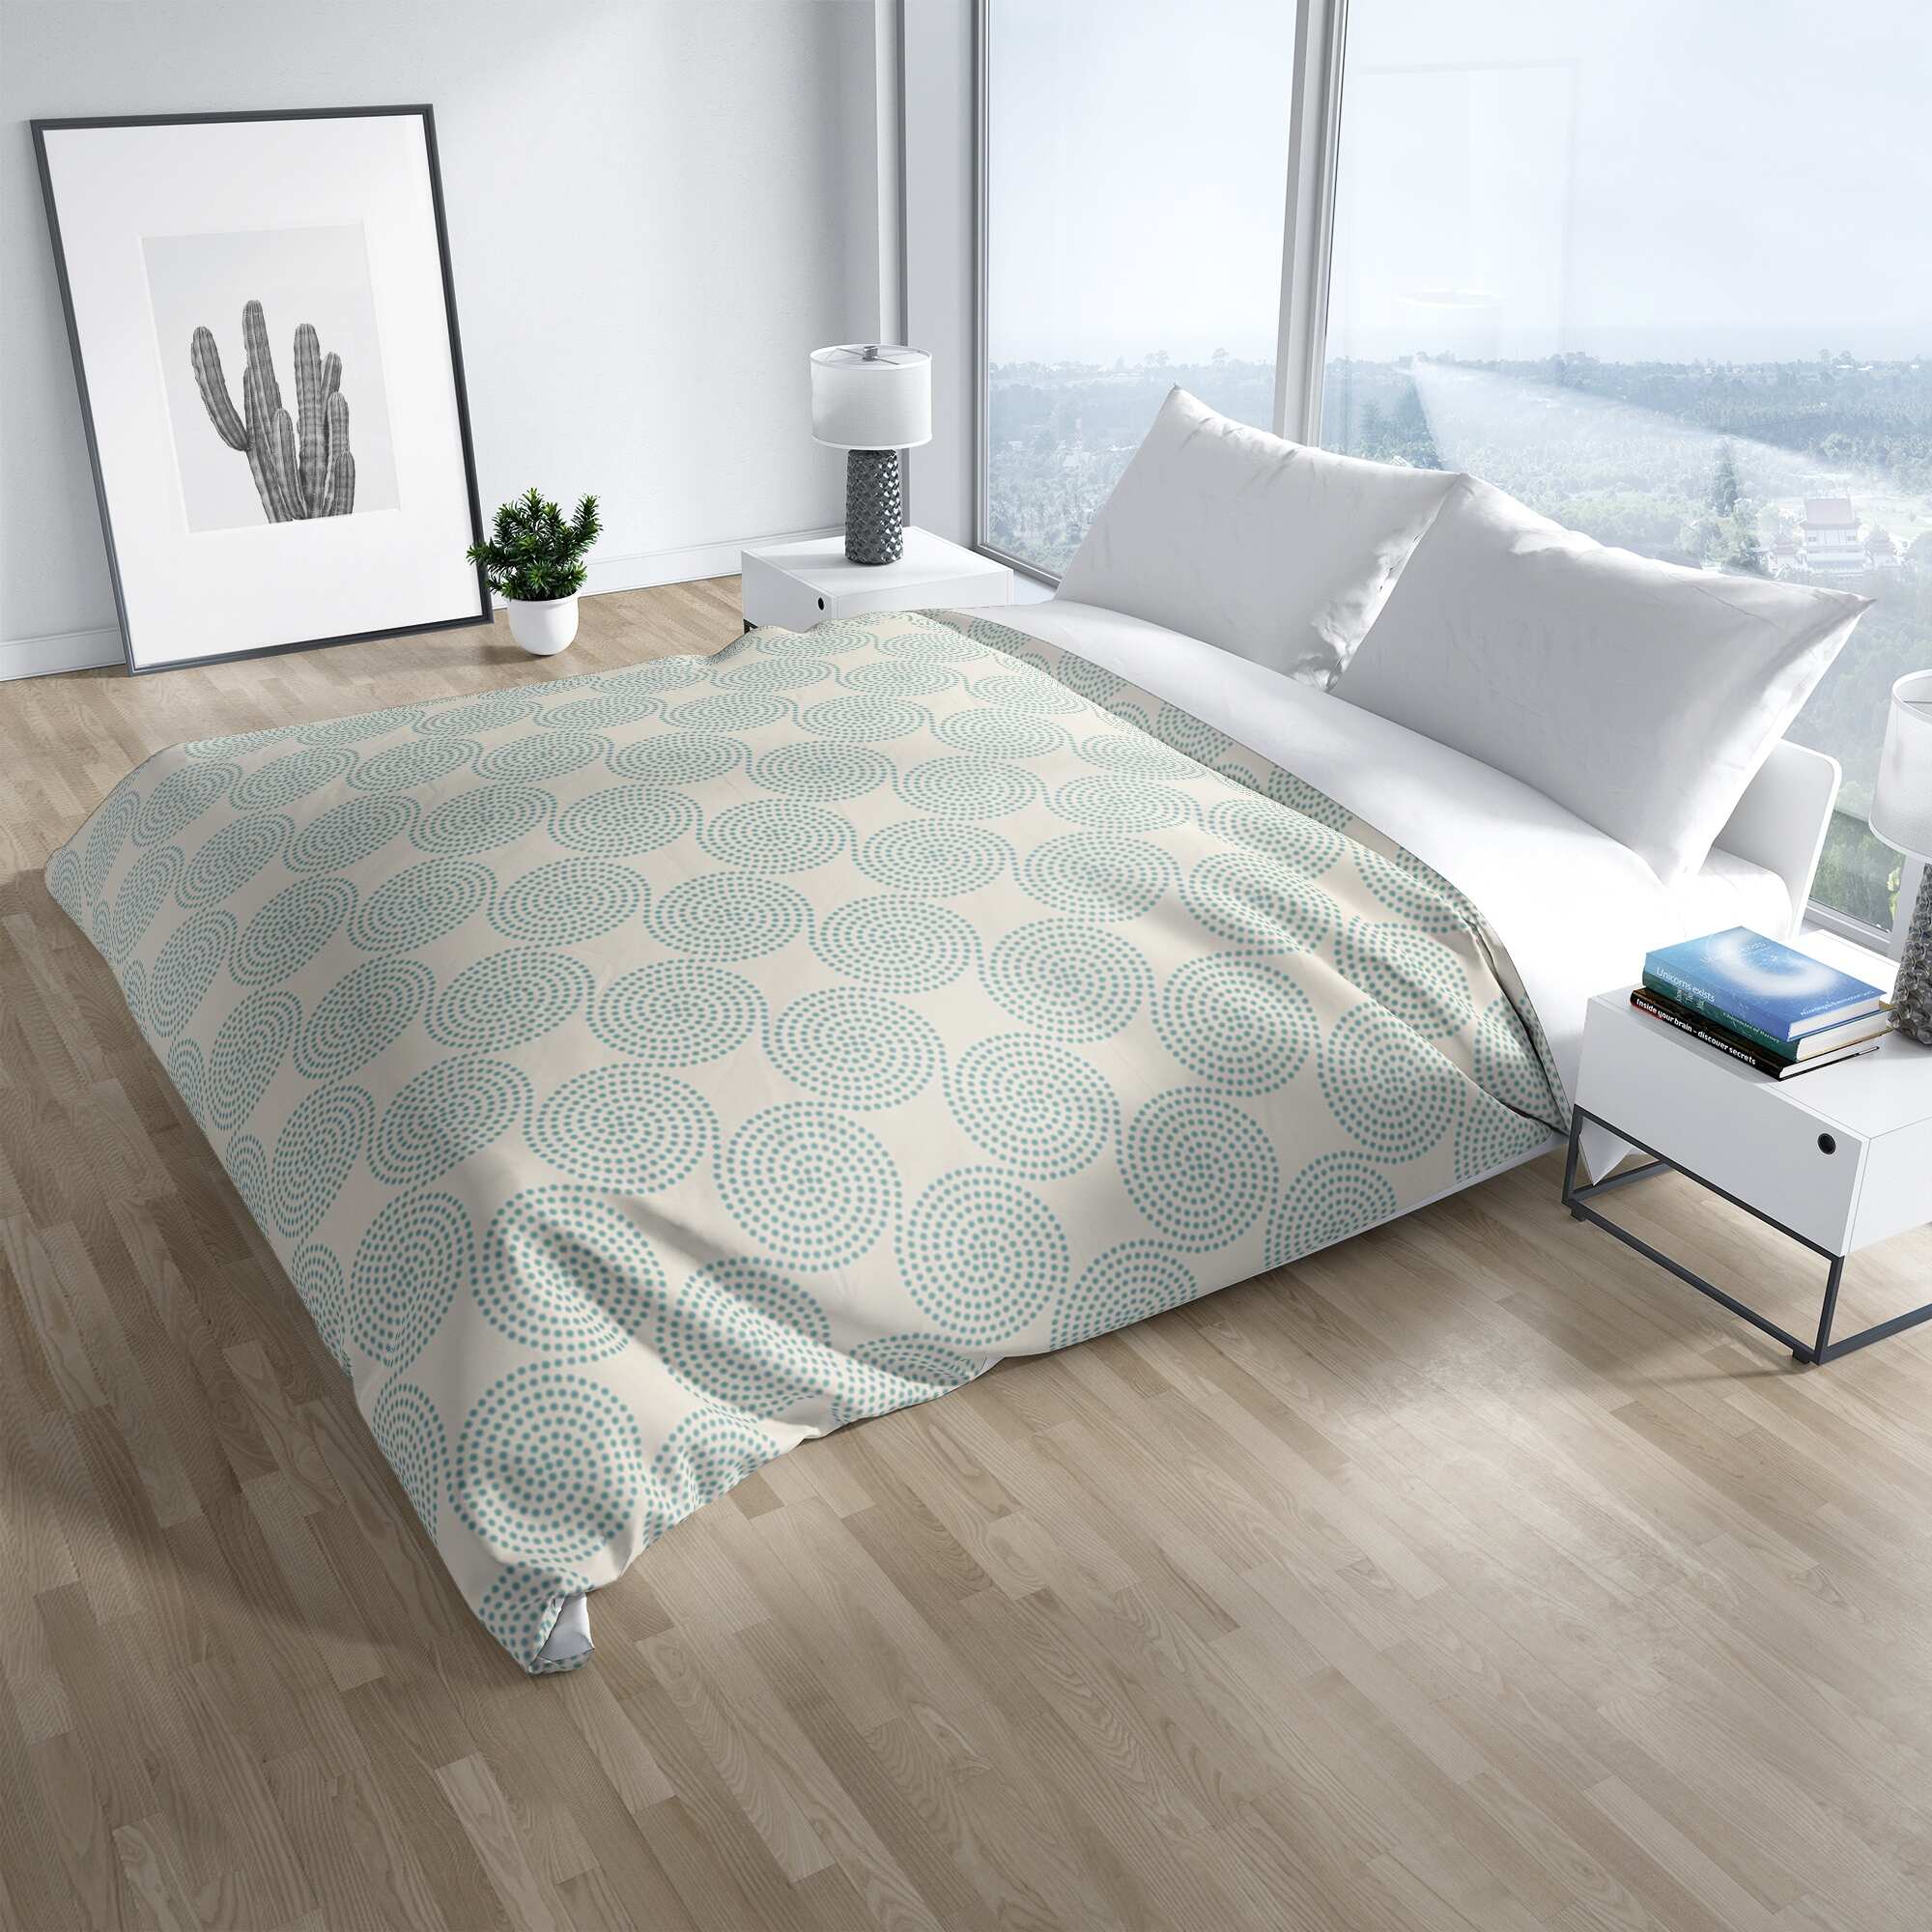 CLOUDS BLUE Duvet Cover By Kavka Designs